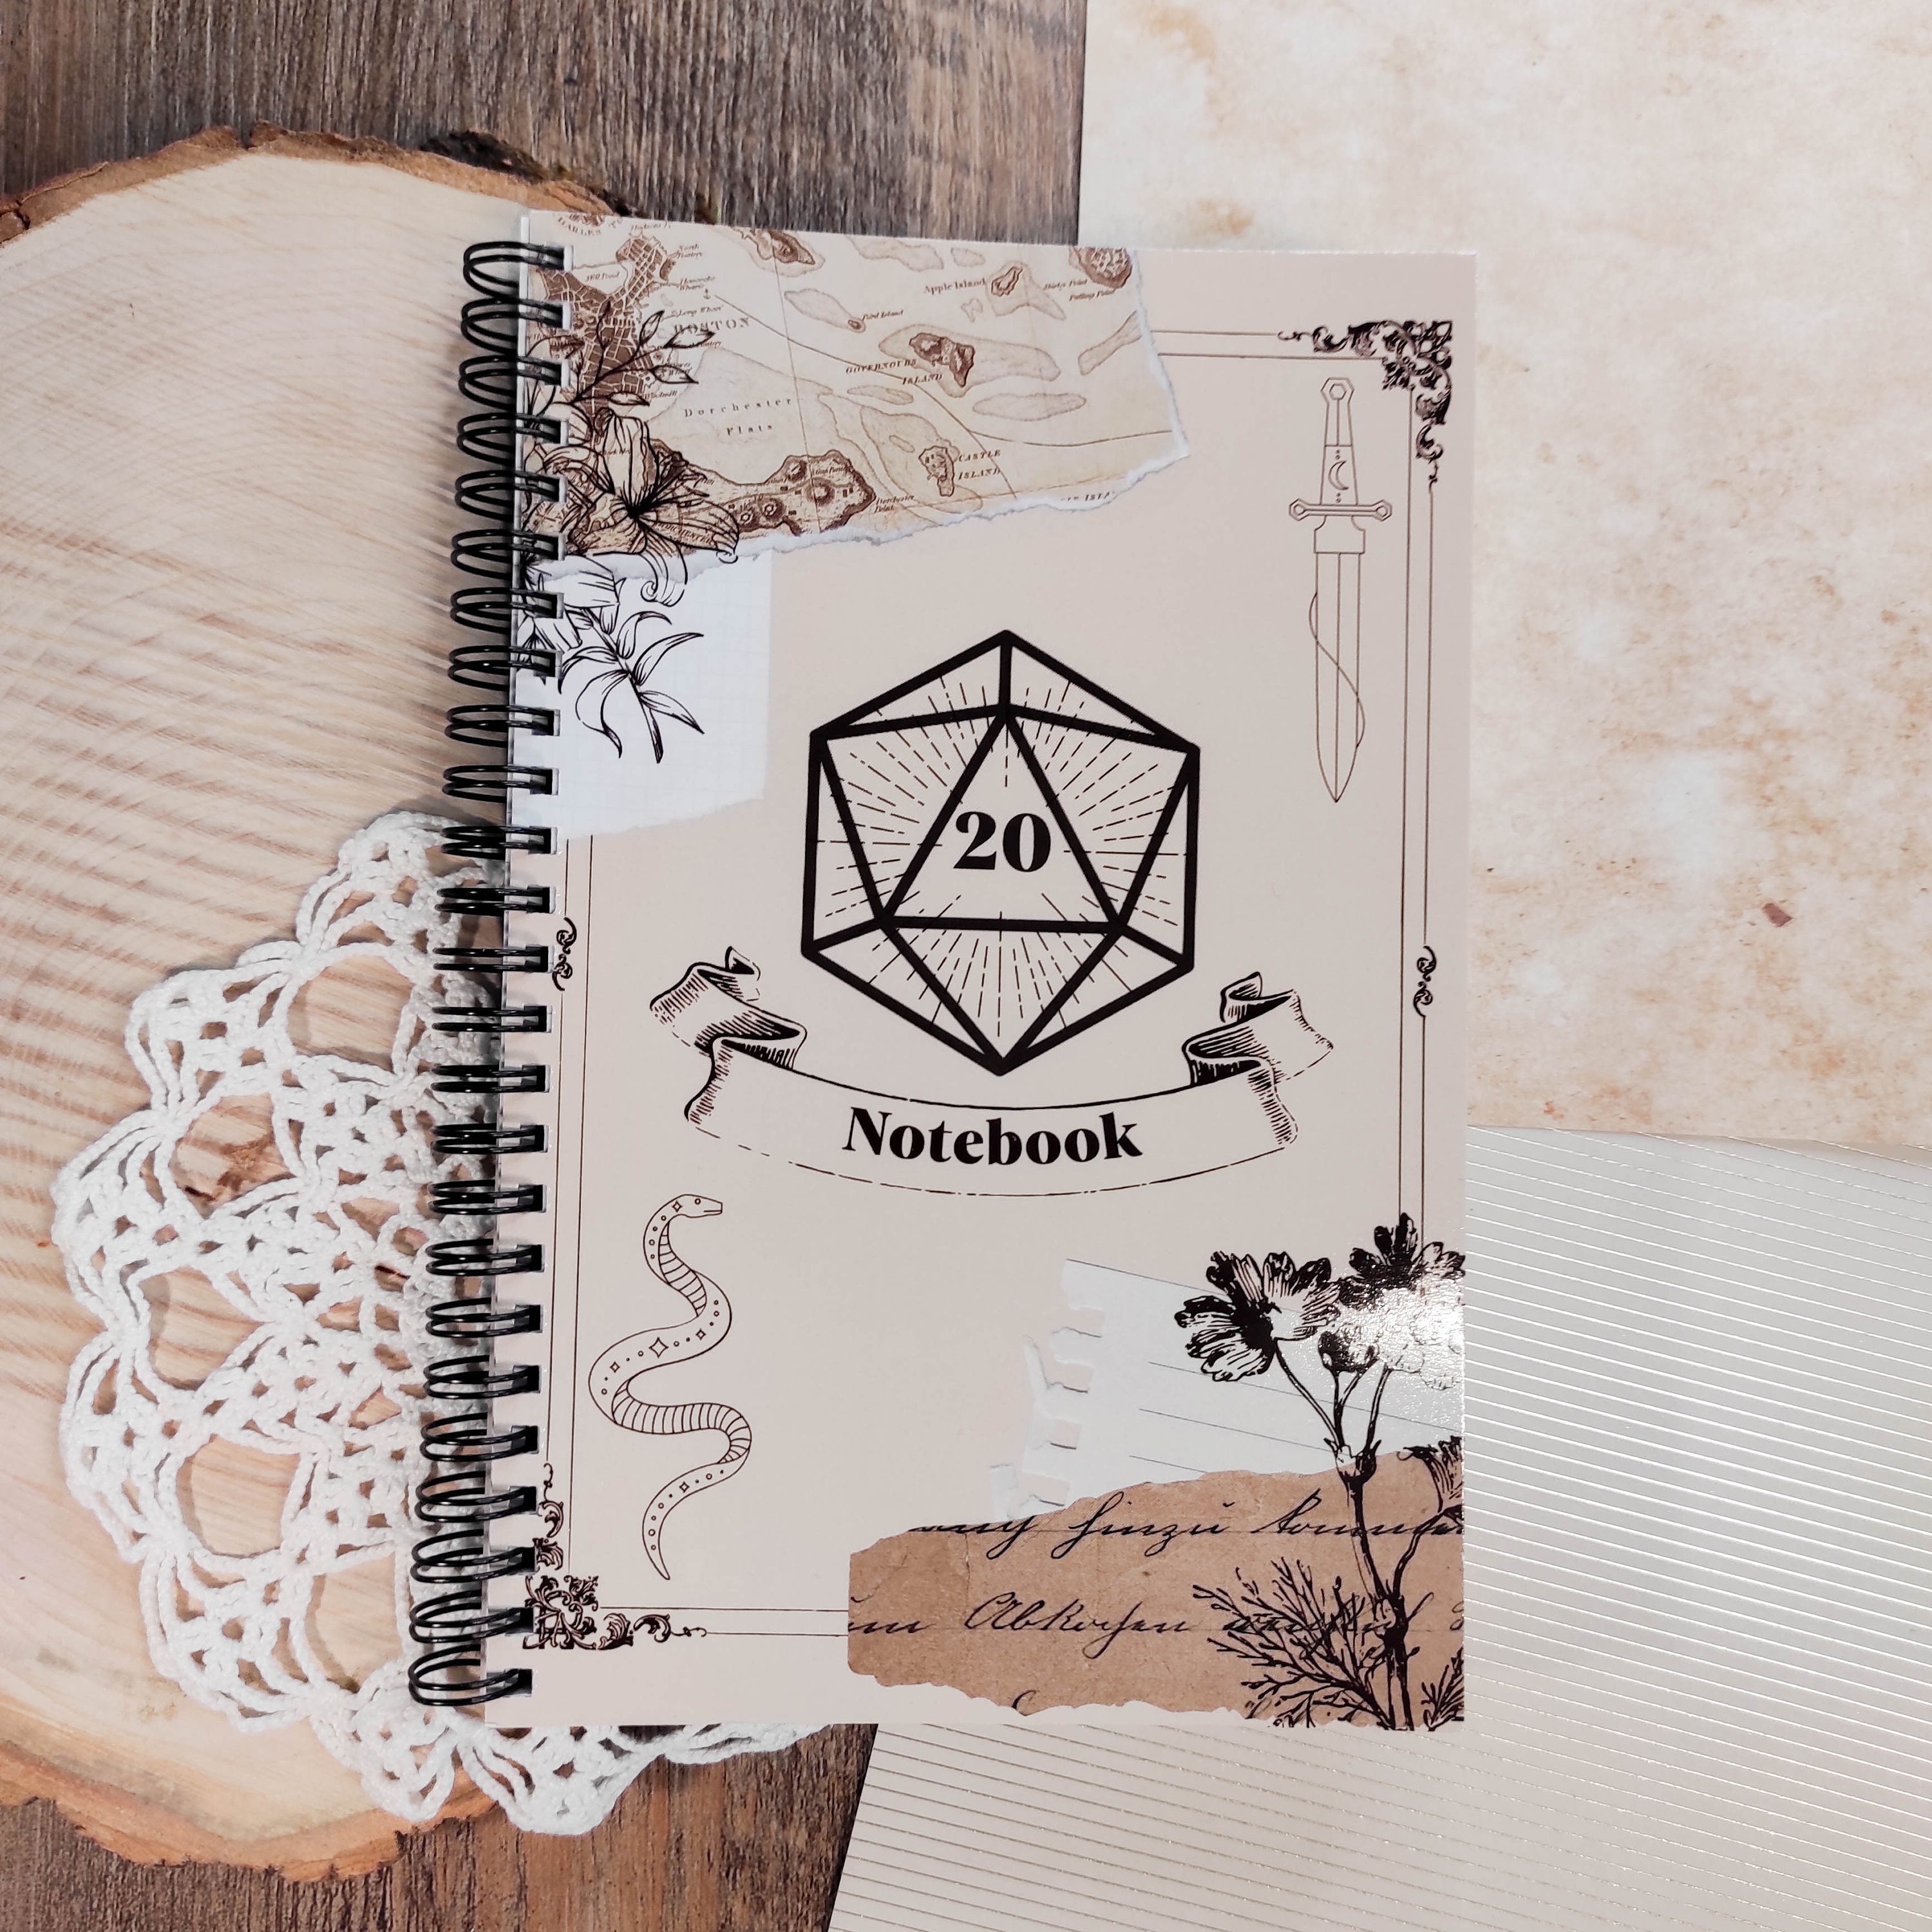 Spiral Notebook D20 Lined, Notes, Art, Illustration, Role Playing, Dnd,  Stationery, Notebook, Dungeon and Dragon 